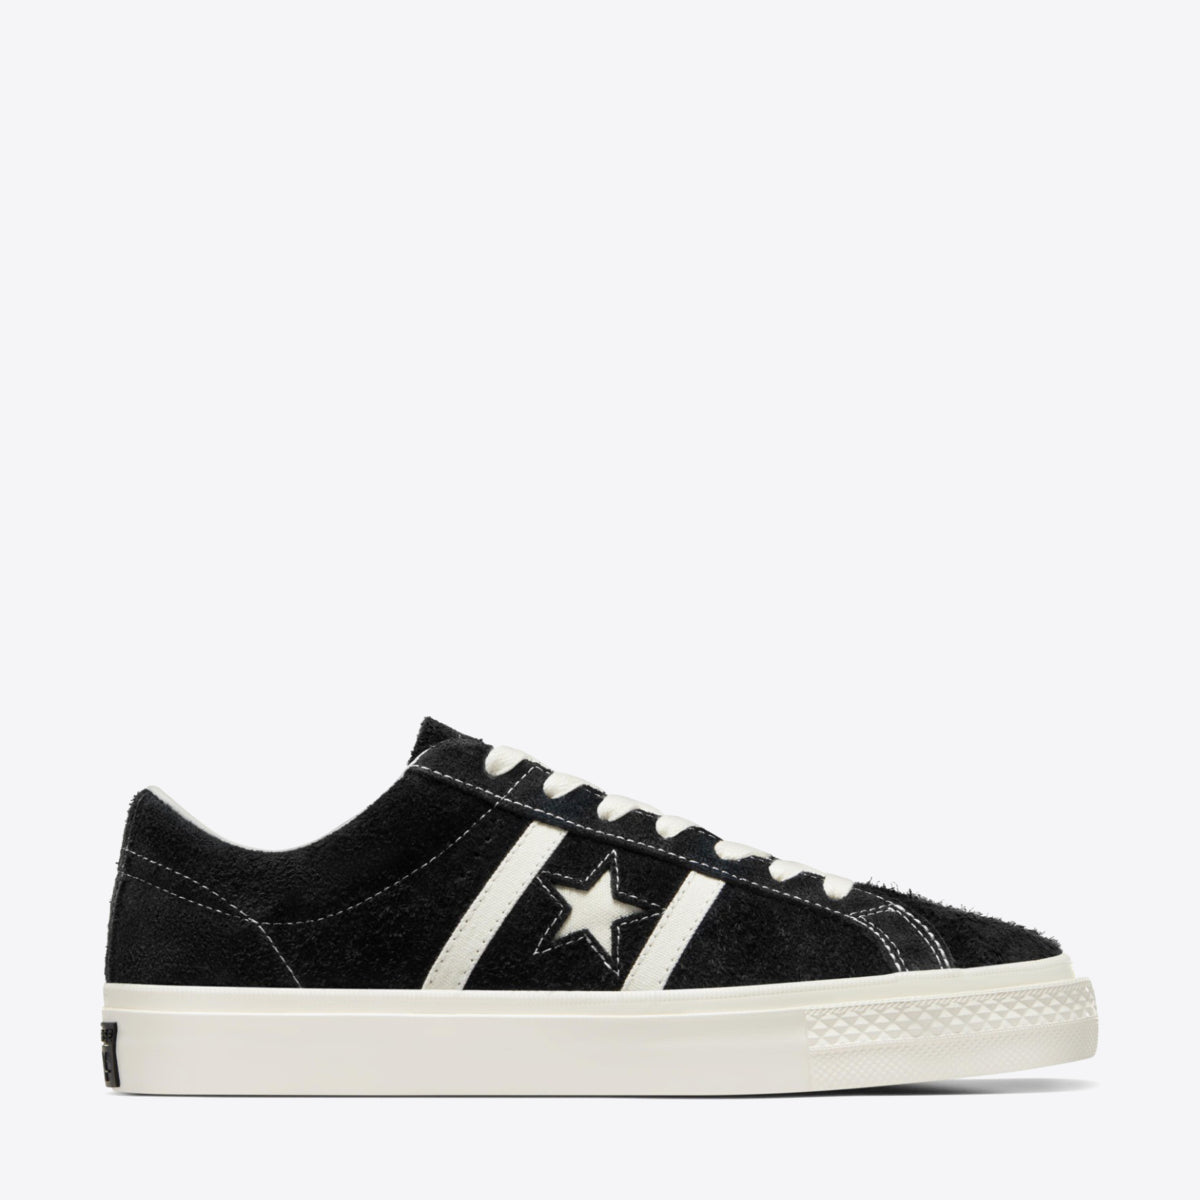 CONVERSE One Star Academy Pro Low Black/Egret - Image 1